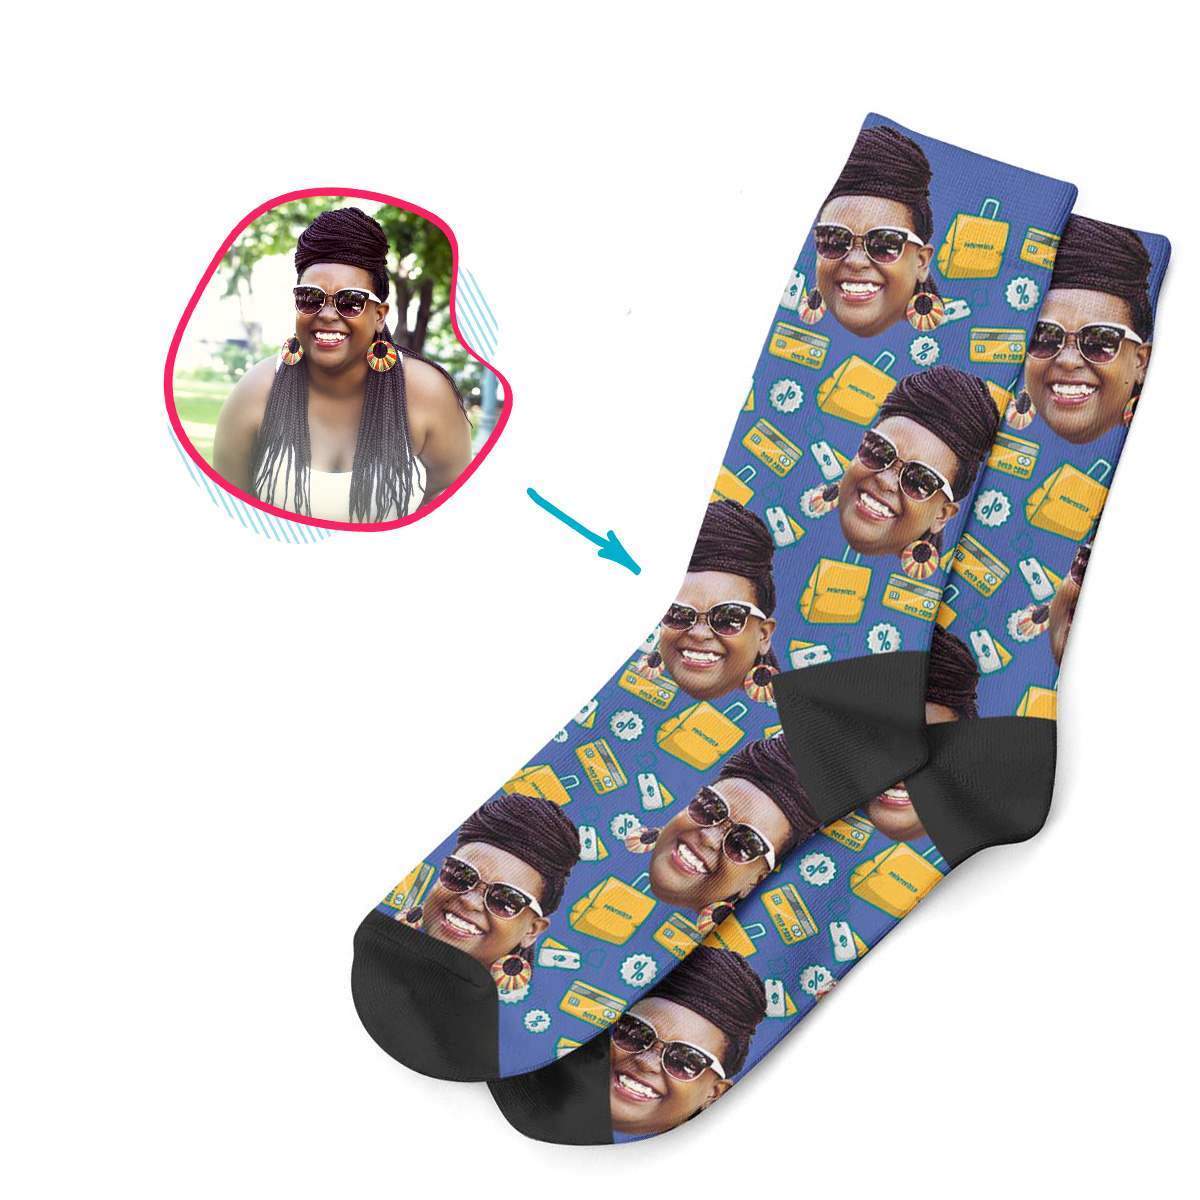 darkblue Shopping socks personalized with photo of face printed on them